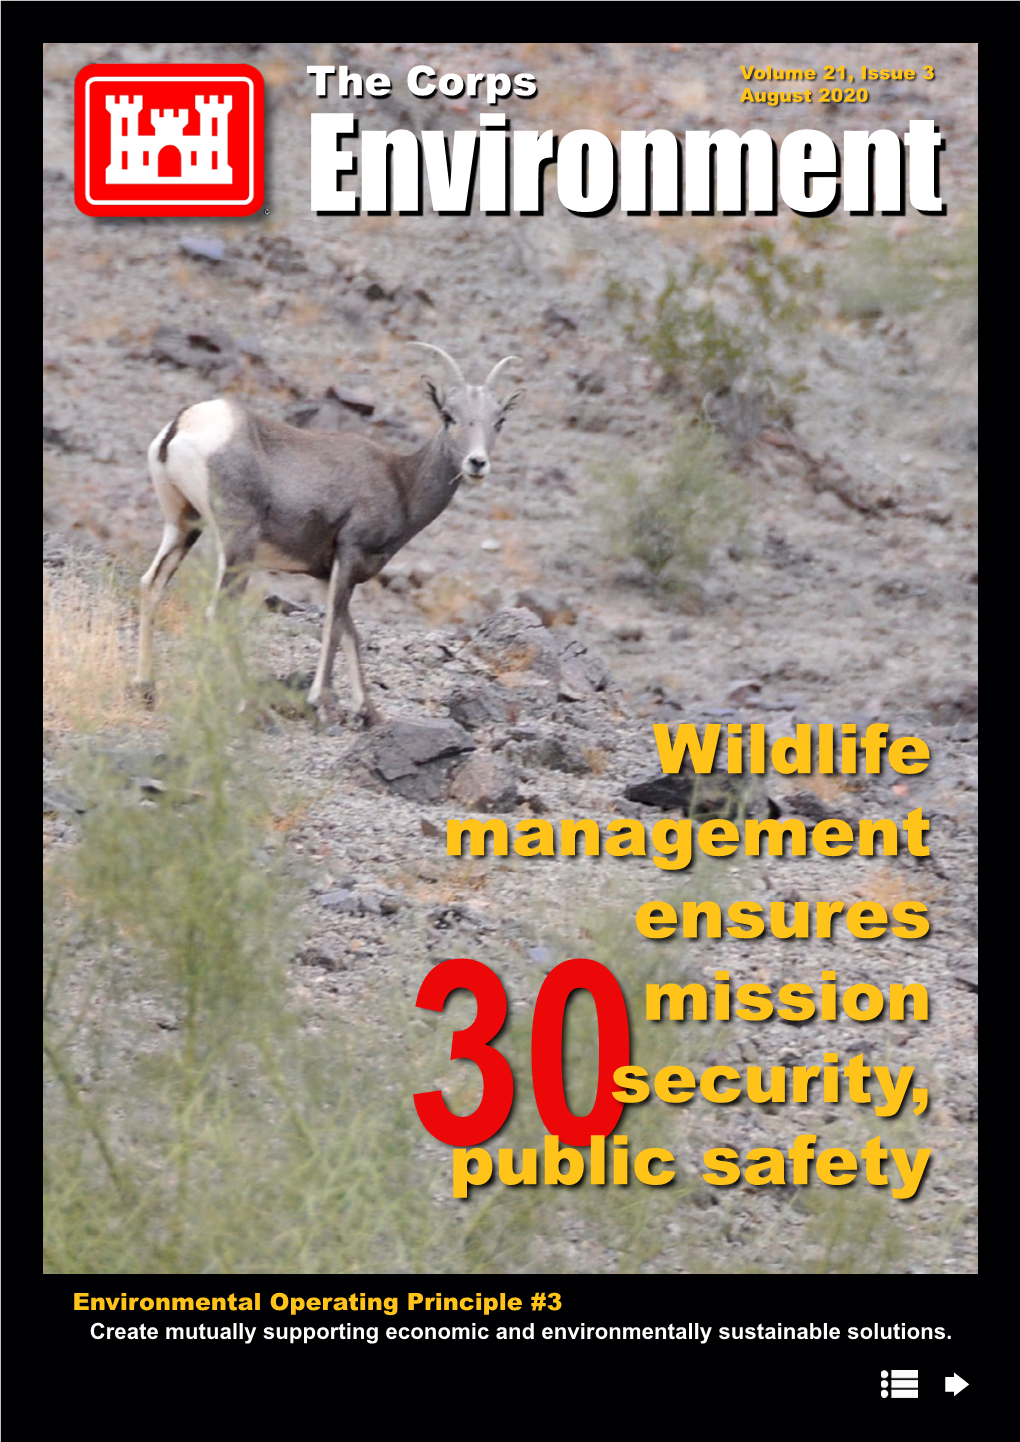 The Corps Environment Is an Online Quarterly News Magazine Published by the U.S